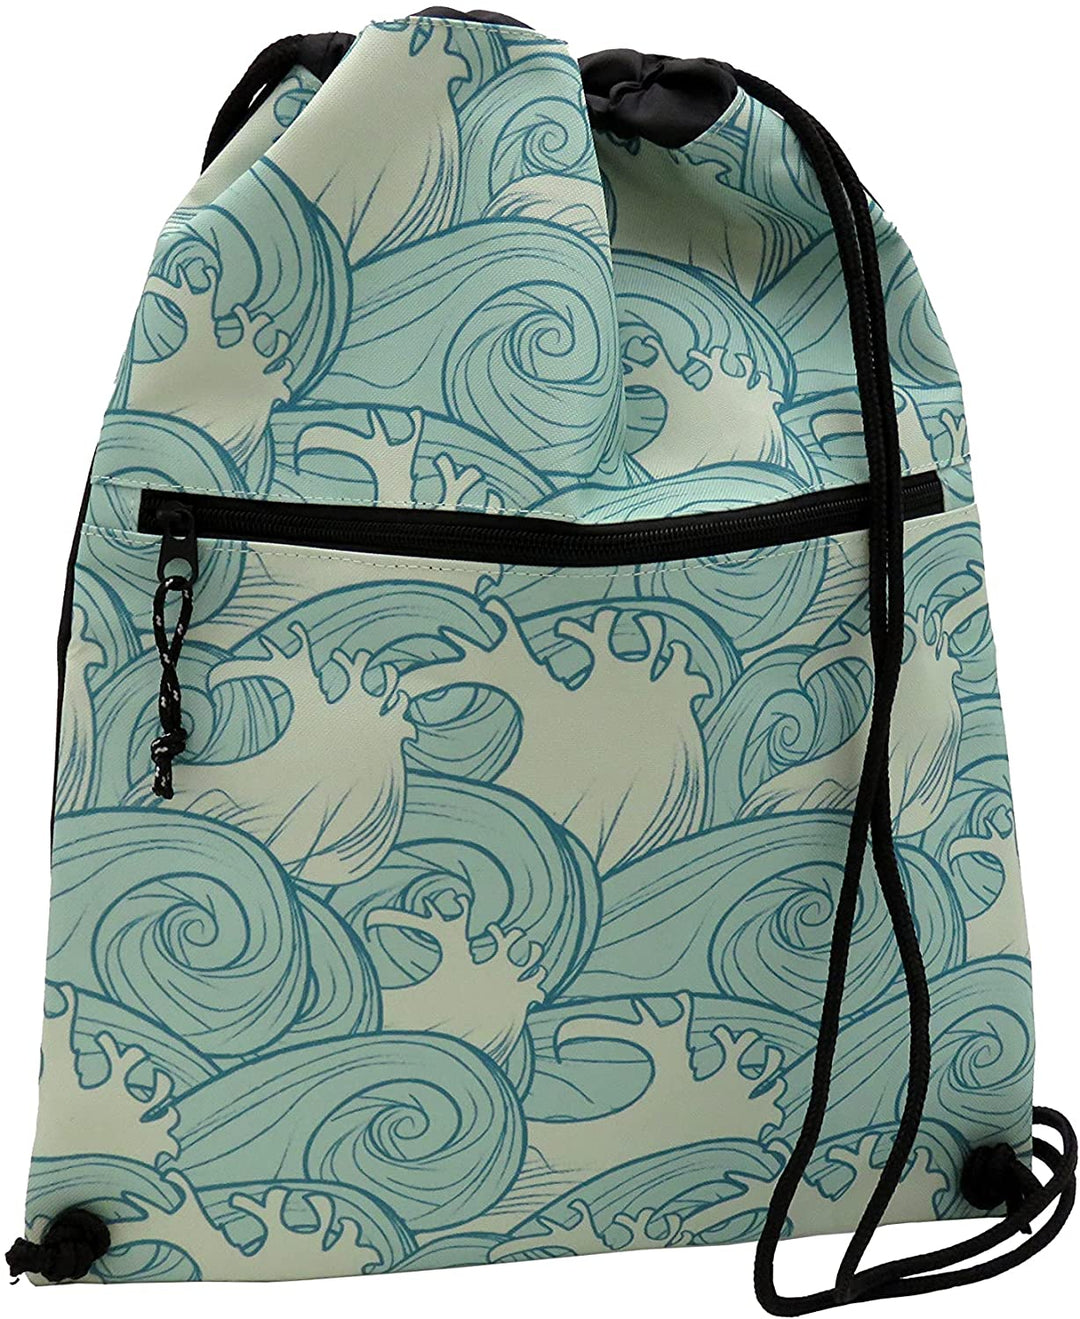 Pokemon Bag Backpack 34x44 - Squirtle (CyP Brands)